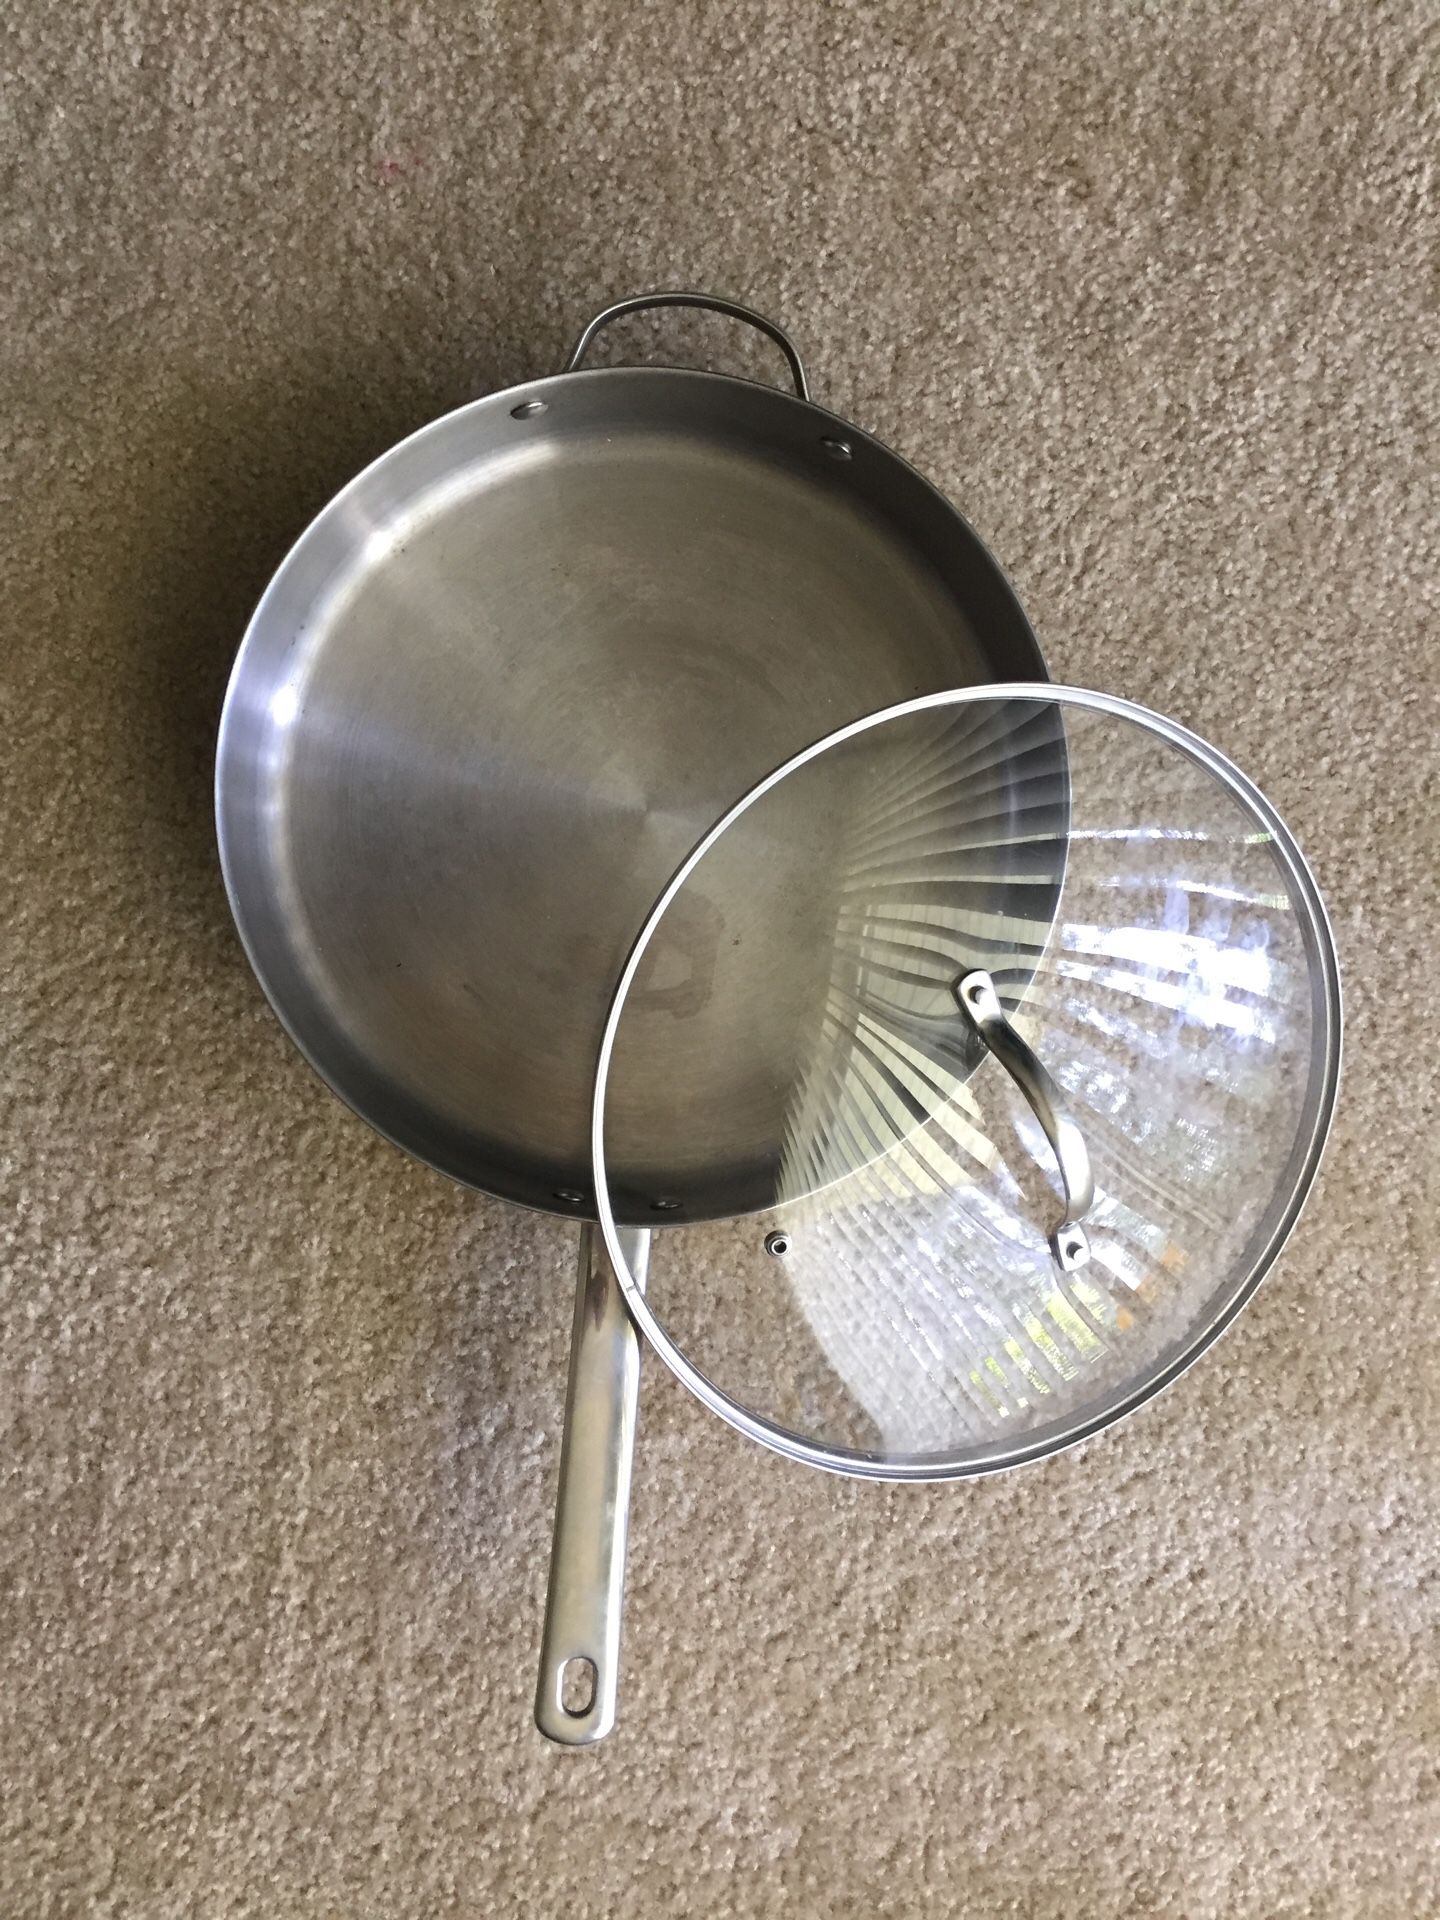 Stainless steel cooking pan.